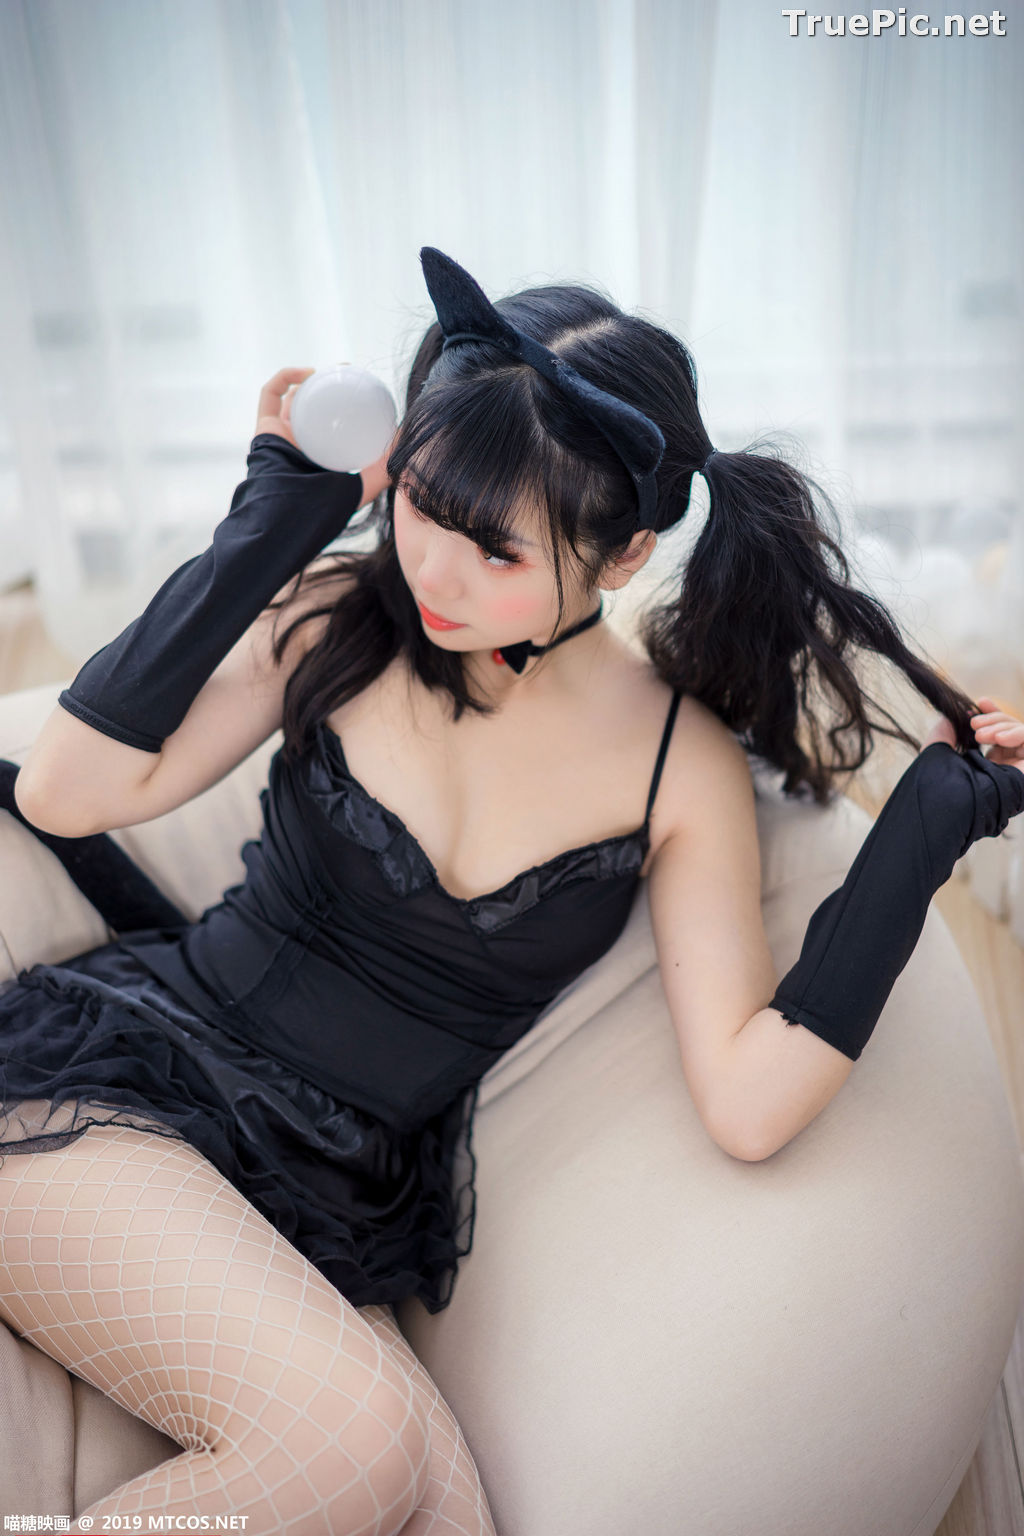 Image [MTCos] 喵糖映画 Vol.045 – Chinese Cute Model – Black Cat Girl - TruePic.net - Picture-9